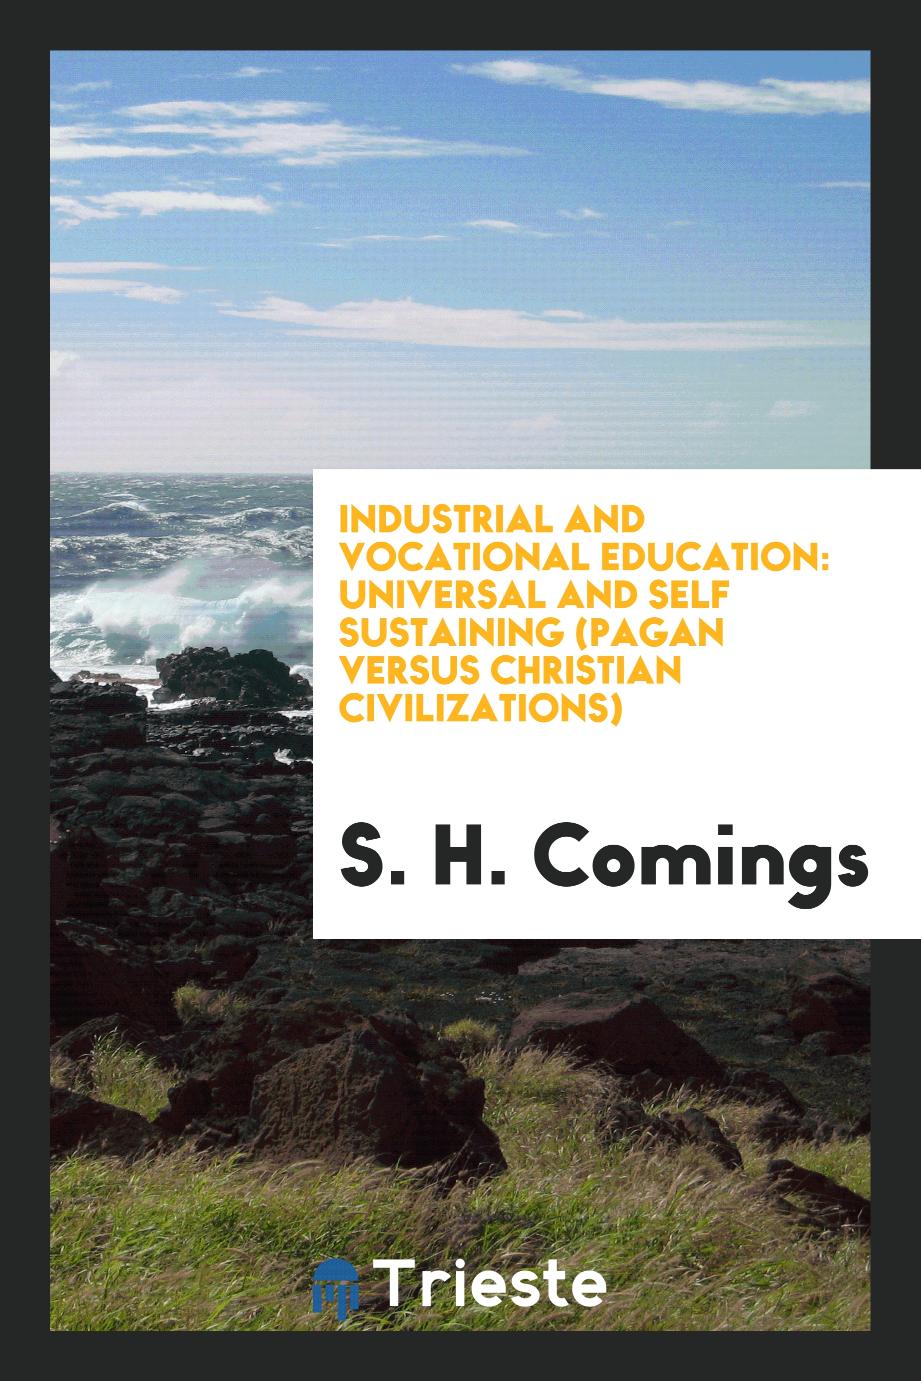 S. H. Comings - Industrial and Vocational Education: Universal and Self Sustaining (Pagan Versus Christian Civilizations)